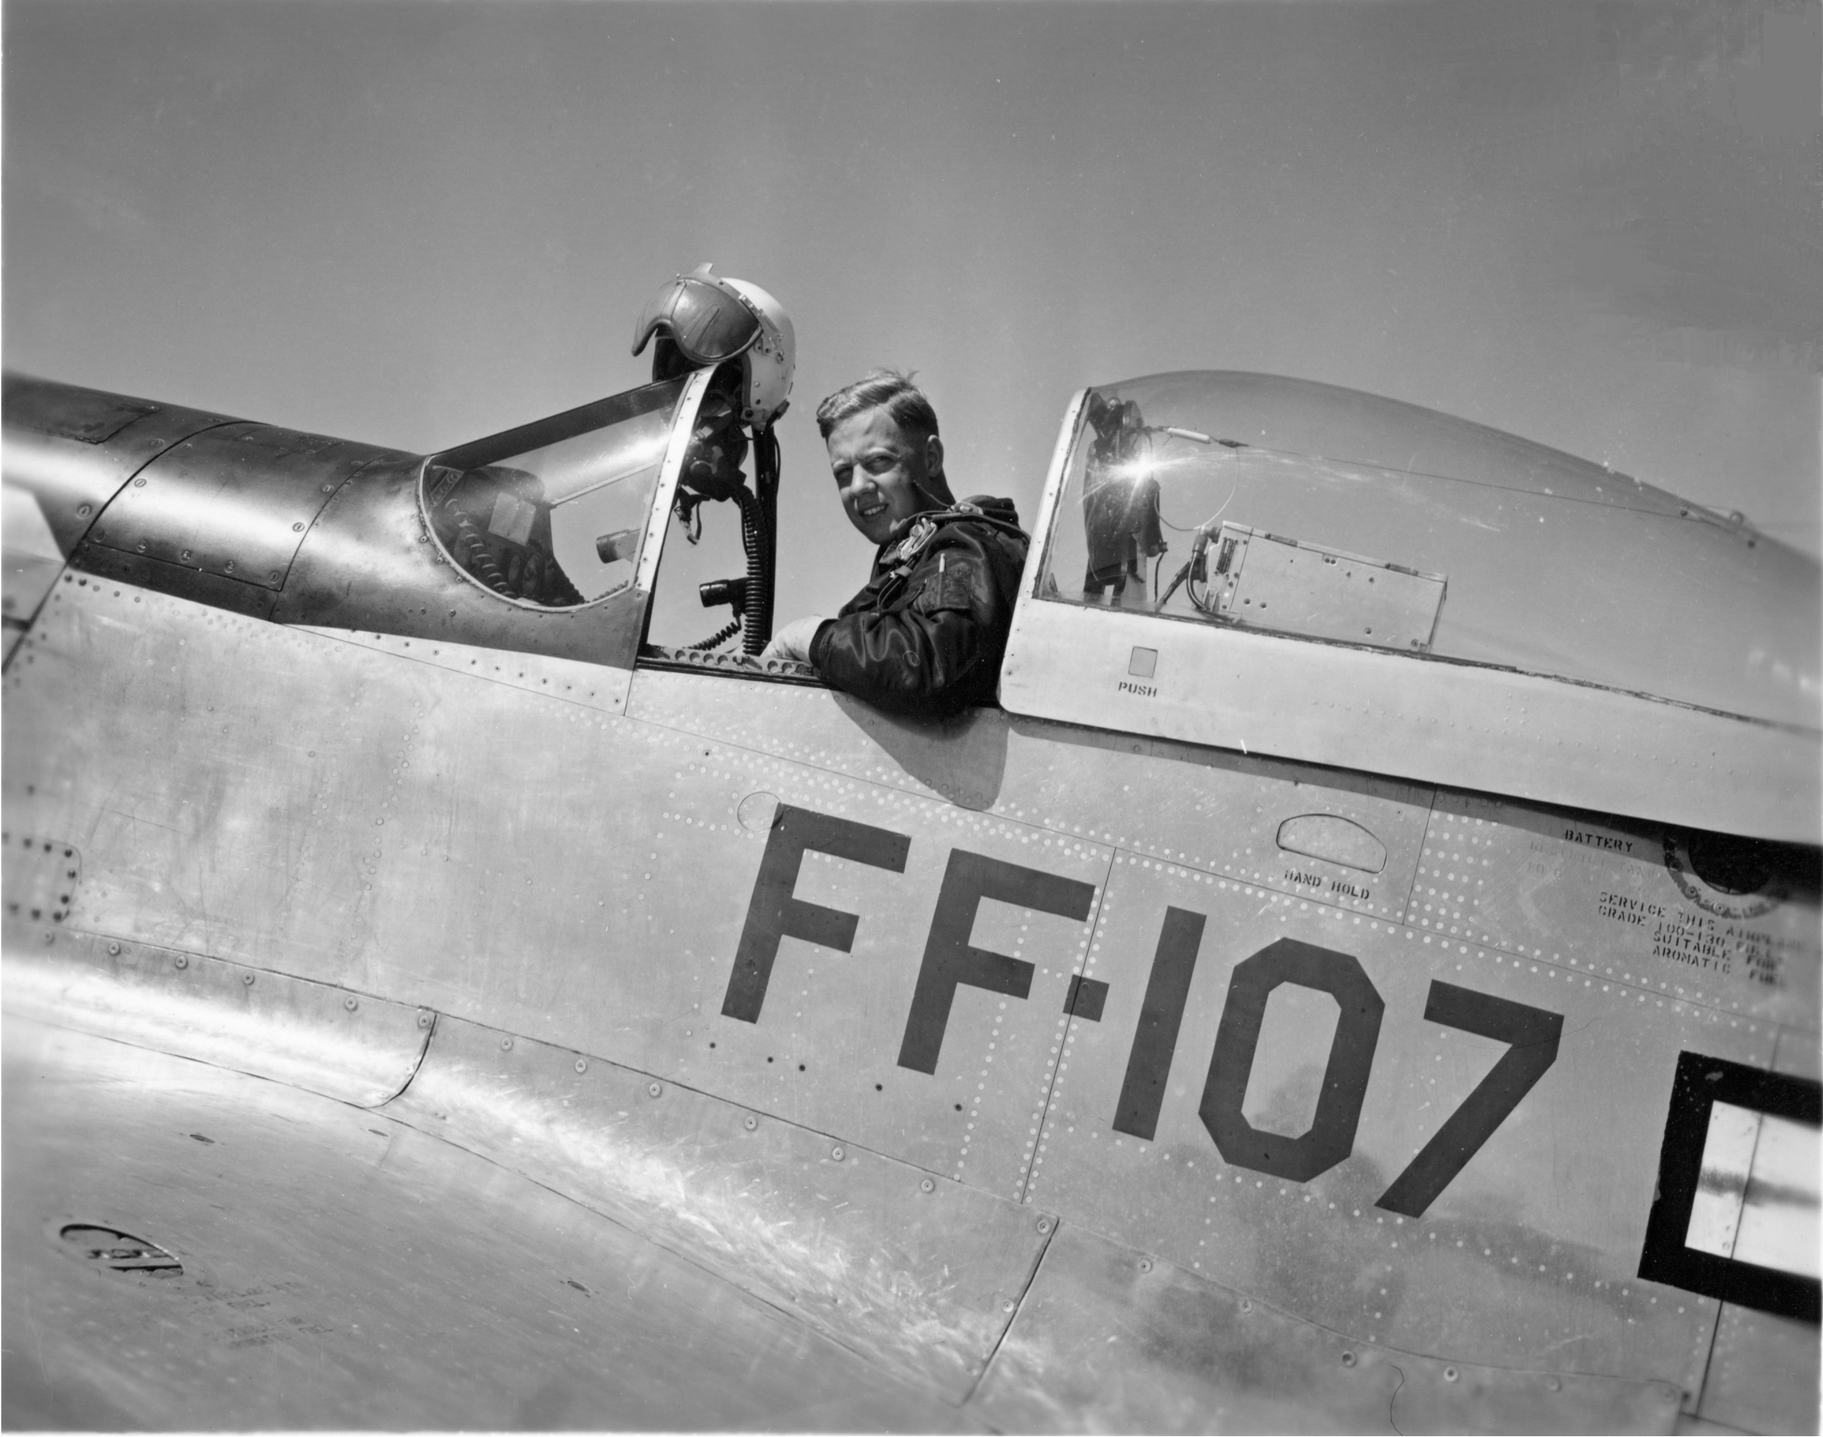 "Earthquake" Titus and the F-51 he flew on the final official USAF Mustang flight. (photo via Titus)